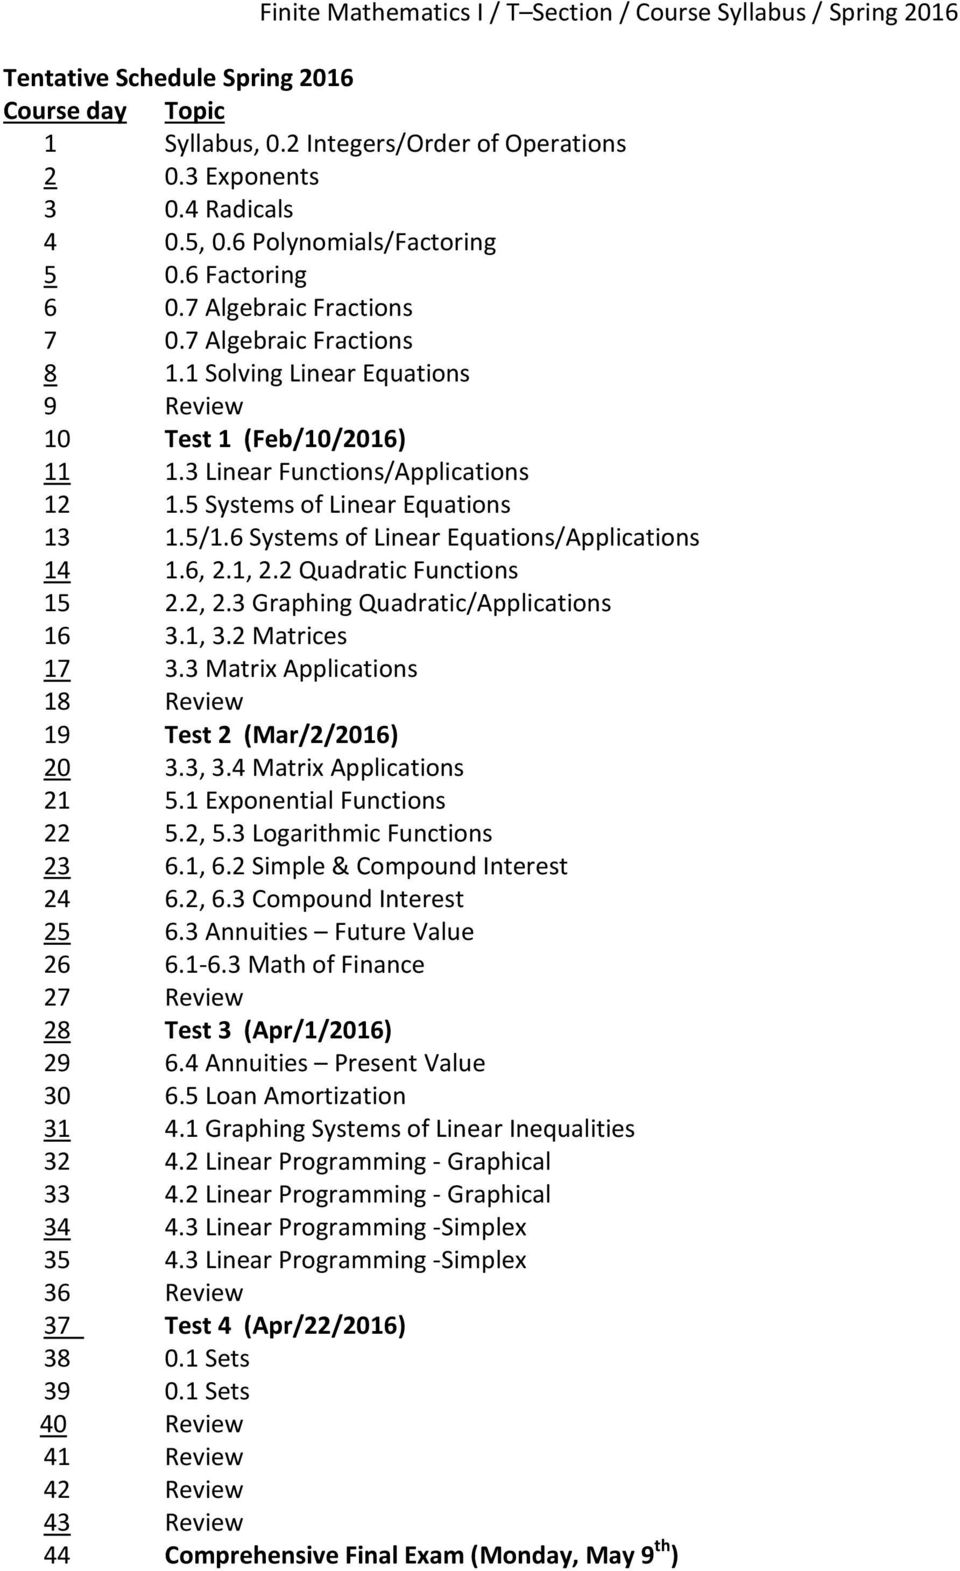 6 Systems of Linear Equations/Applications 14 1.6, 2.1, 2.2 Quadratic Functions 15 2.2, 2.3 Graphing Quadratic/Applications 16 3.1, 3.2 Matrices 17 3.